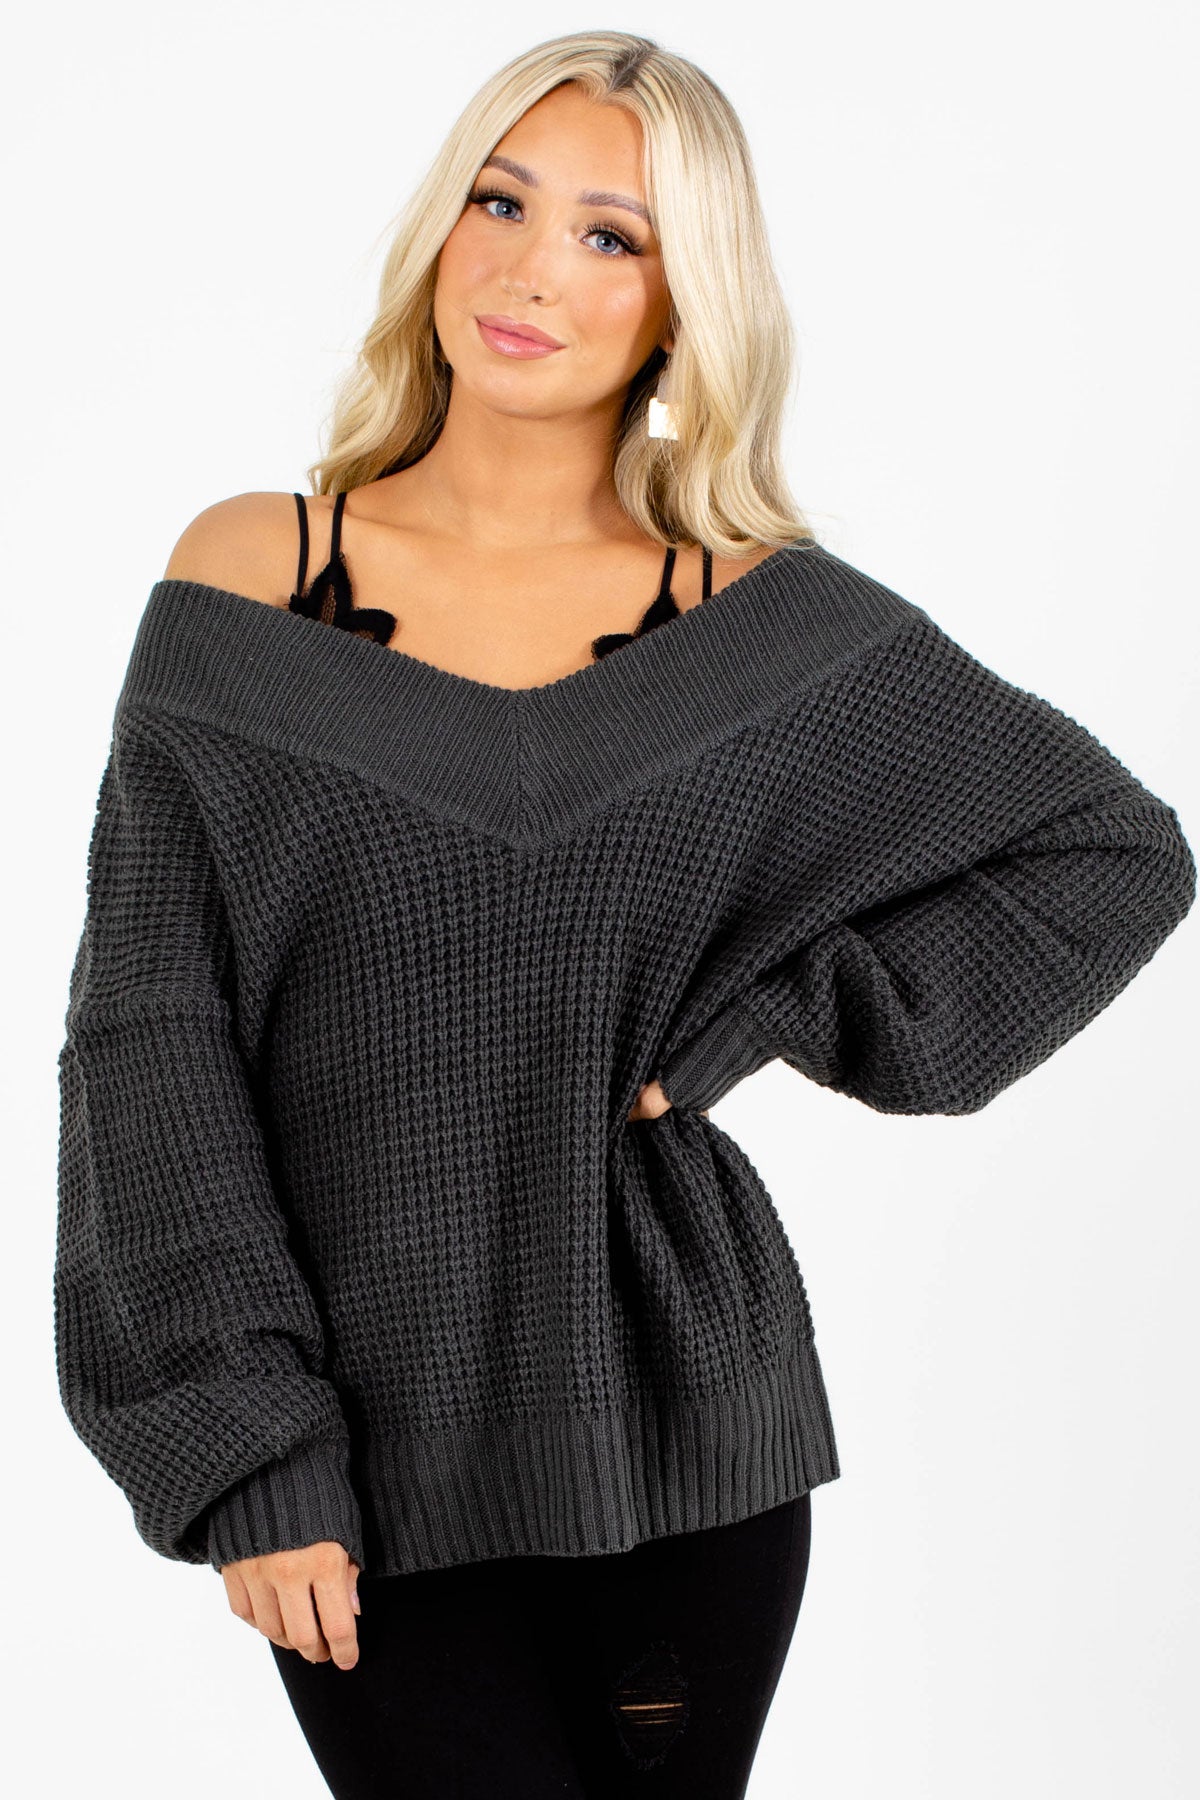 Gray Long Sleeve Boutique Sweaters for Women